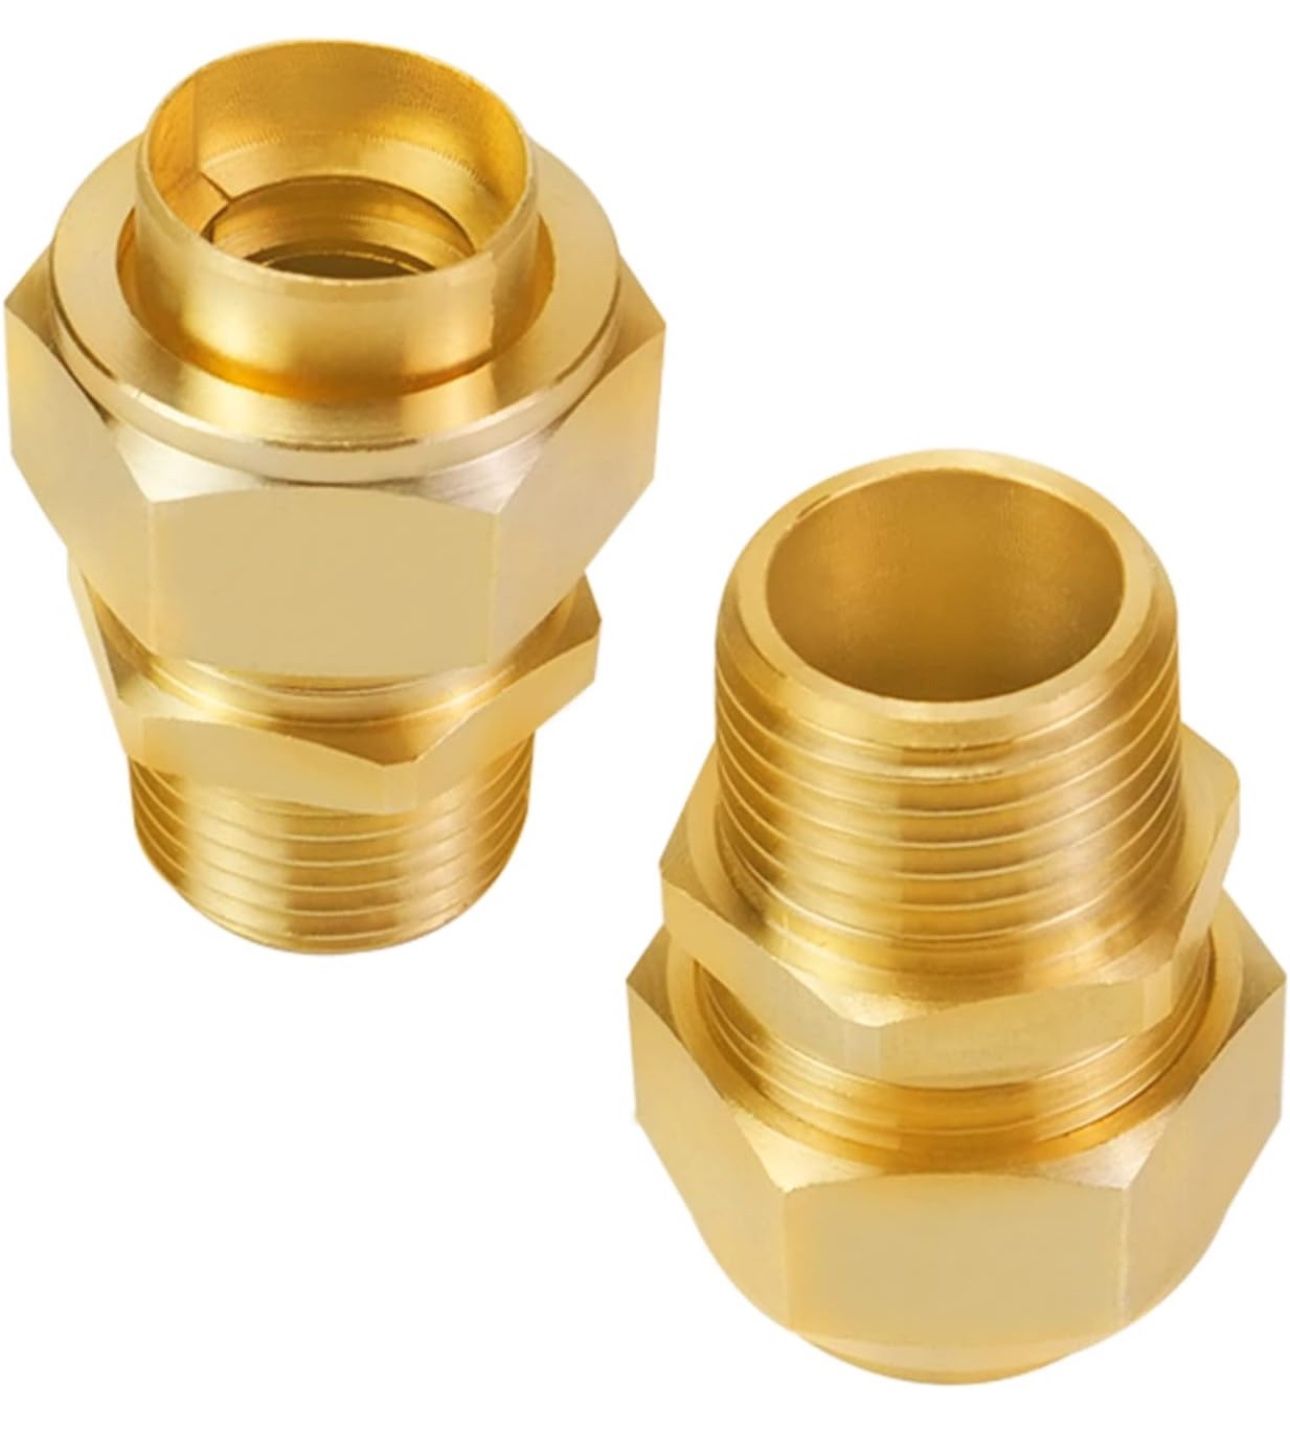 1/2" NPT Brass Pipe Fittings Male Threaded Hex Nipple Brass Tone NPT Male Thread Pipe used for 1/2in Gas Pipe Pack of 2